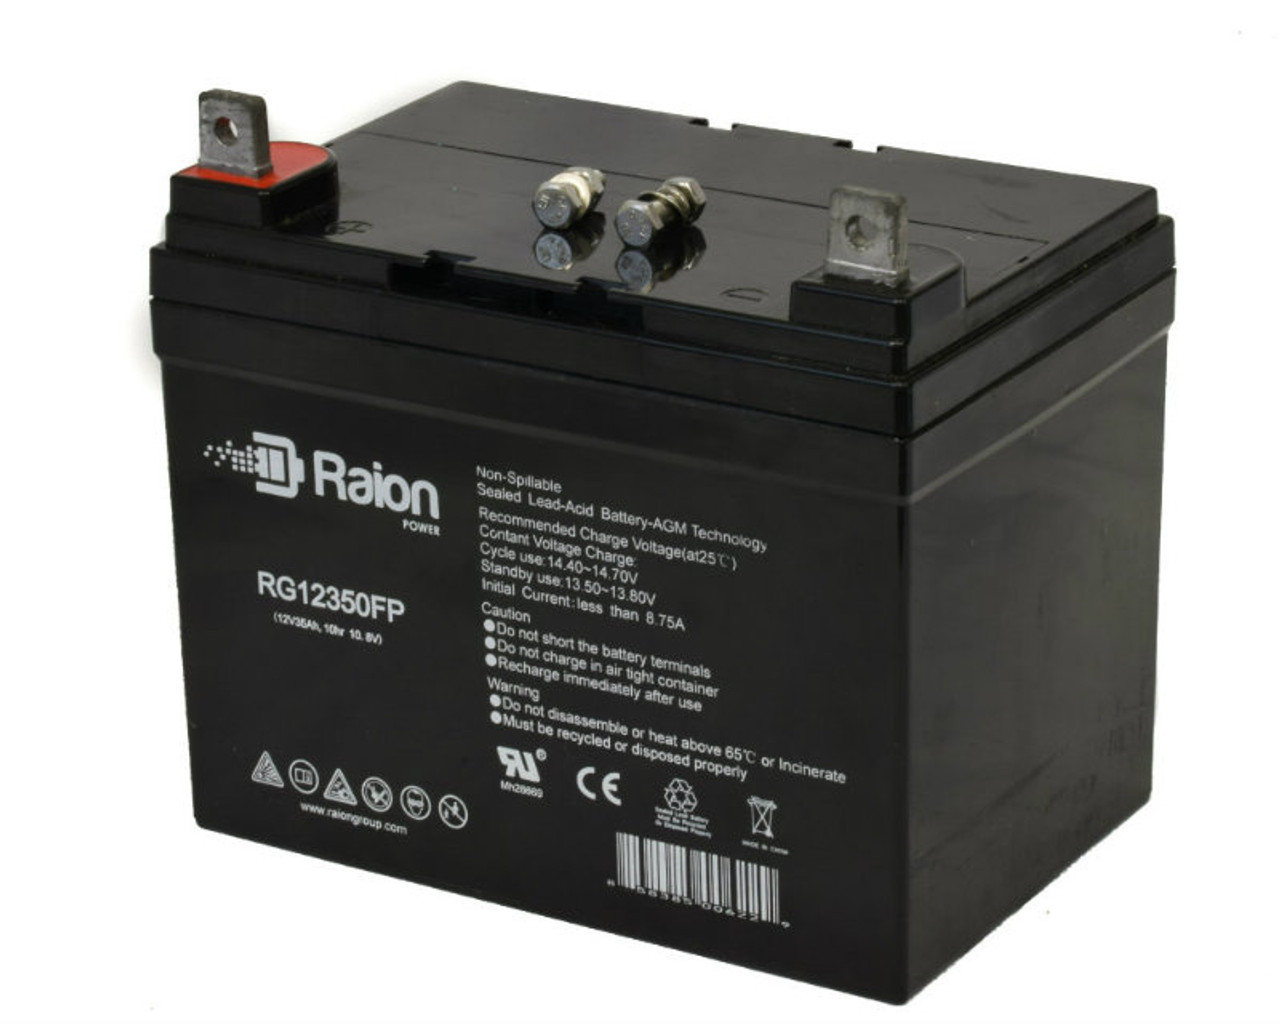 Raion Power Replacement 12V 35Ah RG12350FP Battery for Yazoo/Kees ZKW 42170